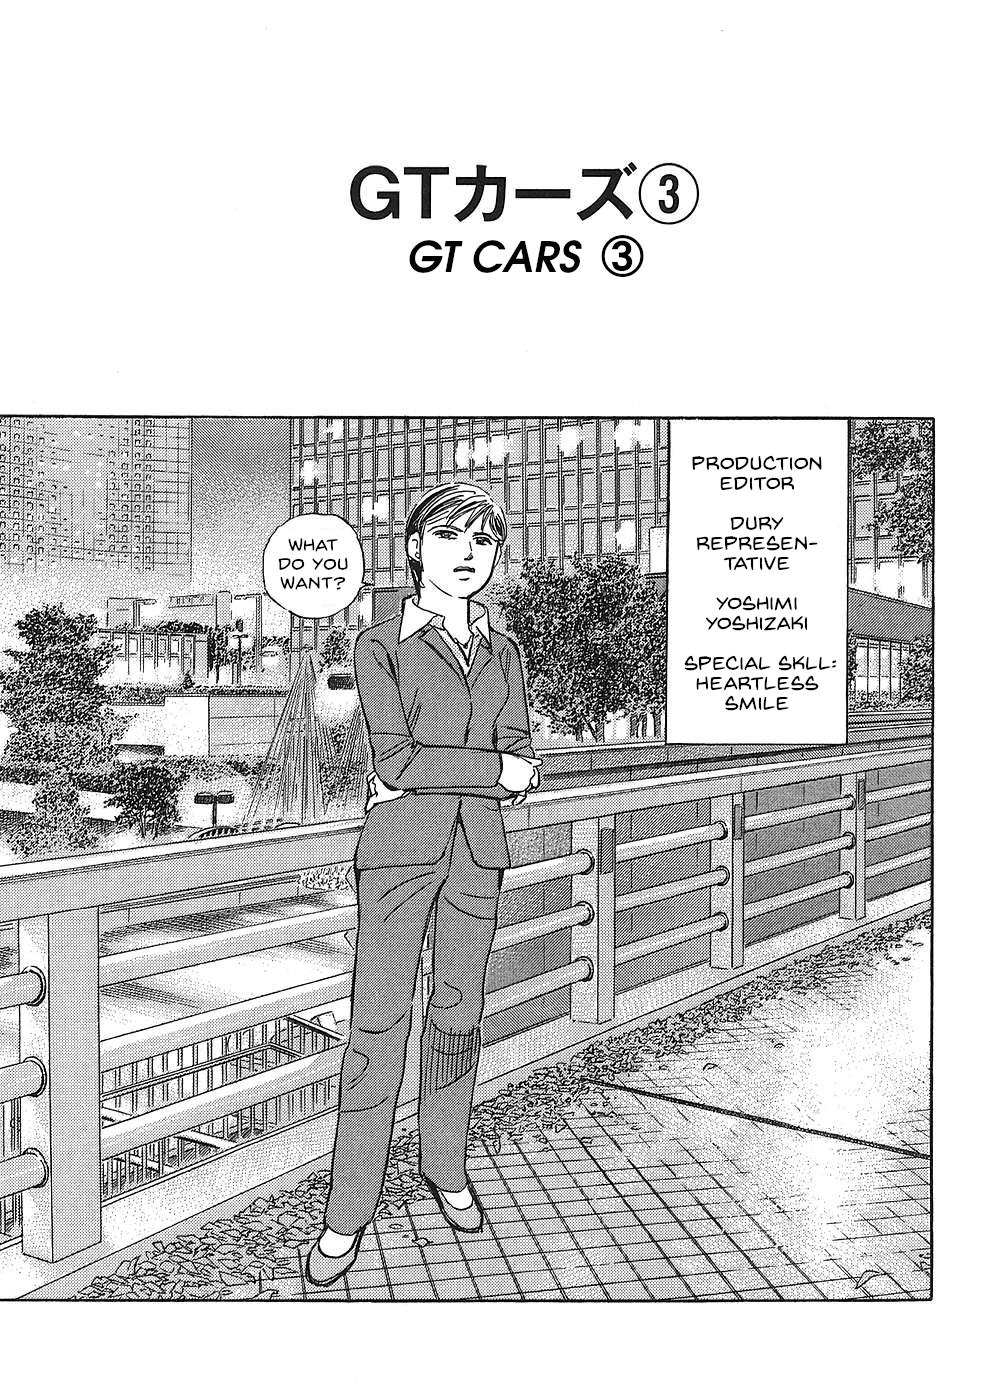 Wangan Midnight: C1 Runner Vol.4 Chapter 43: Gt Cars ③ - Picture 1